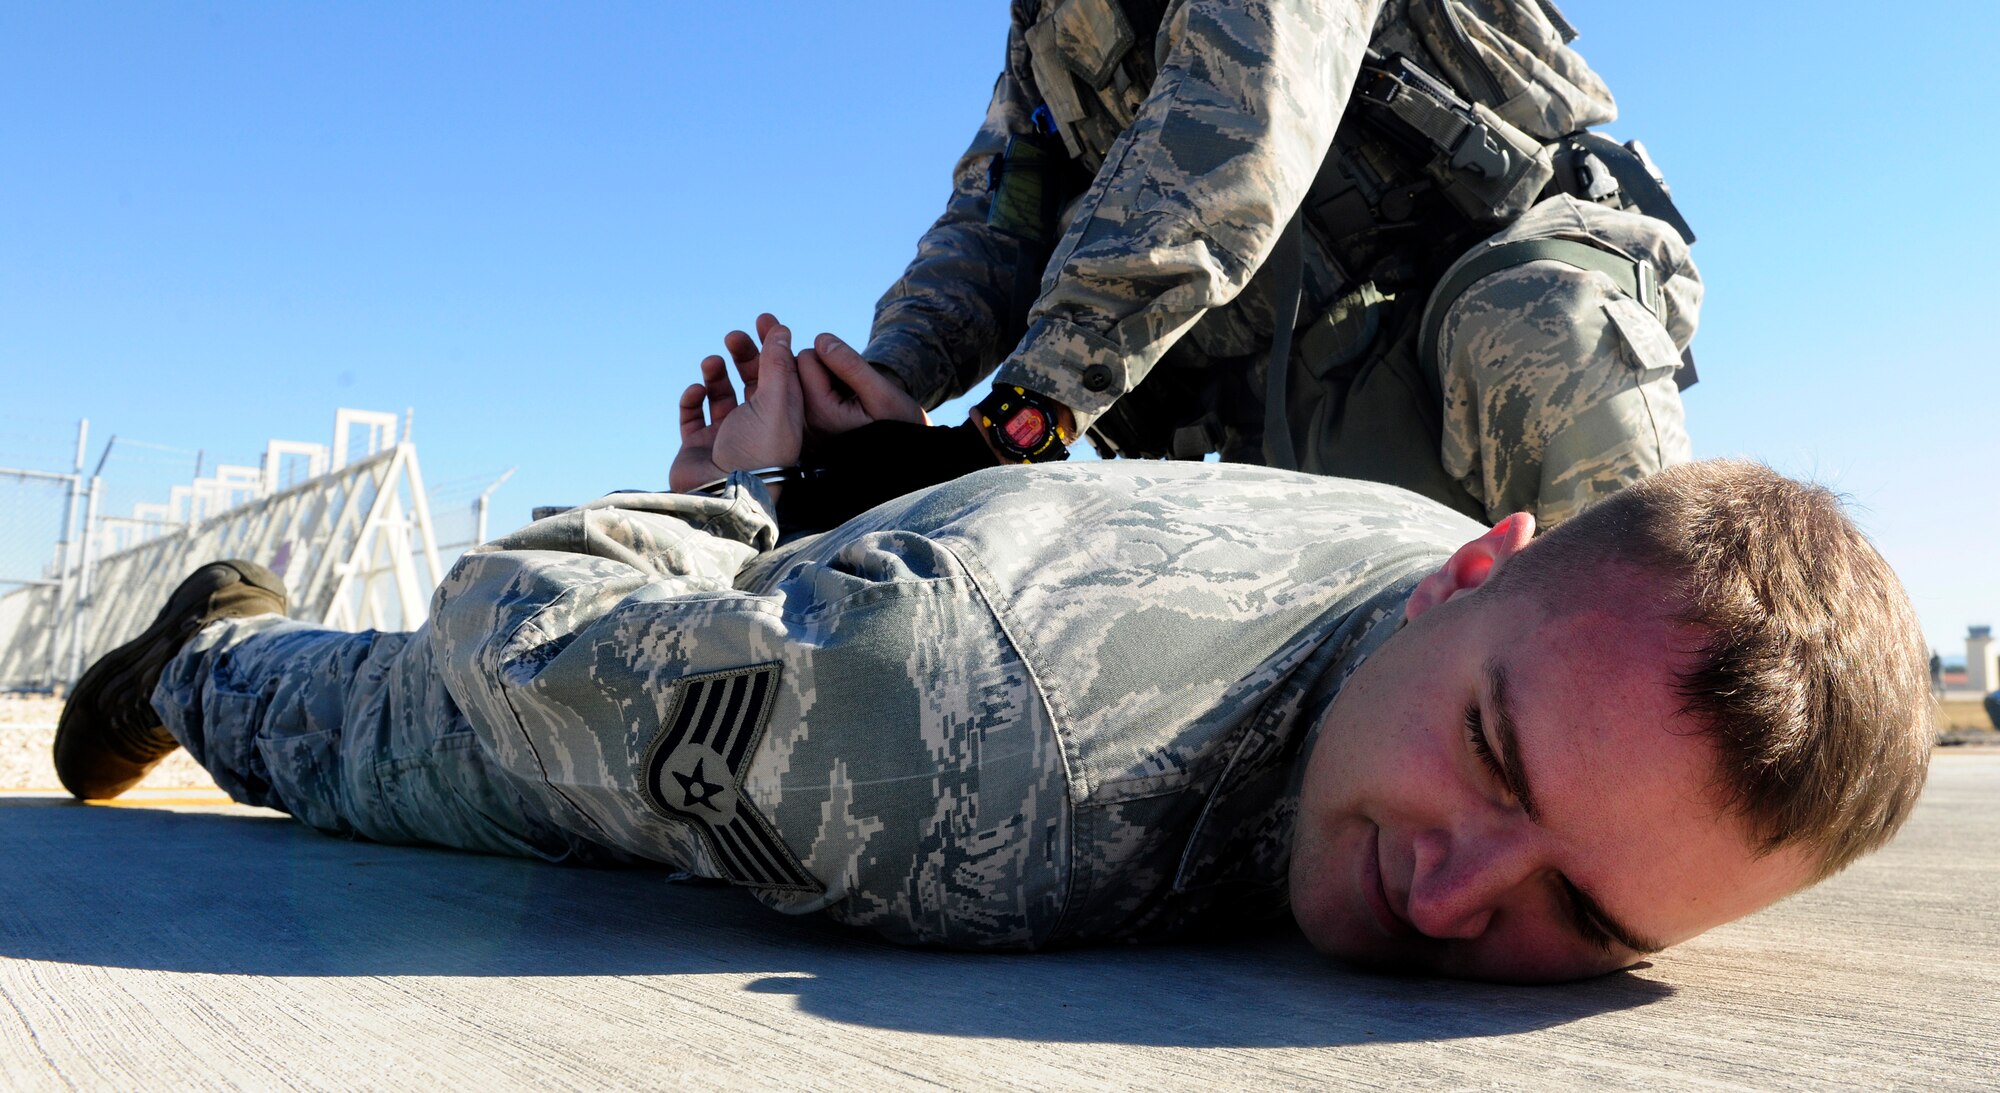 Staff Sgt. Robert Prichard, 39th Maintenance Squadron equipment maintenance technician, is searched by an Airman from the 39th Security Forces Squadron during a wing exercise Jan. 15, 2016, at Incirlik Air Base, Turkey. Prichard was apprehended while acting as a simulated insider threat during a wing exercise. (U.S. Air Force photo by Senior Airman Krystal Ardrey/Released)